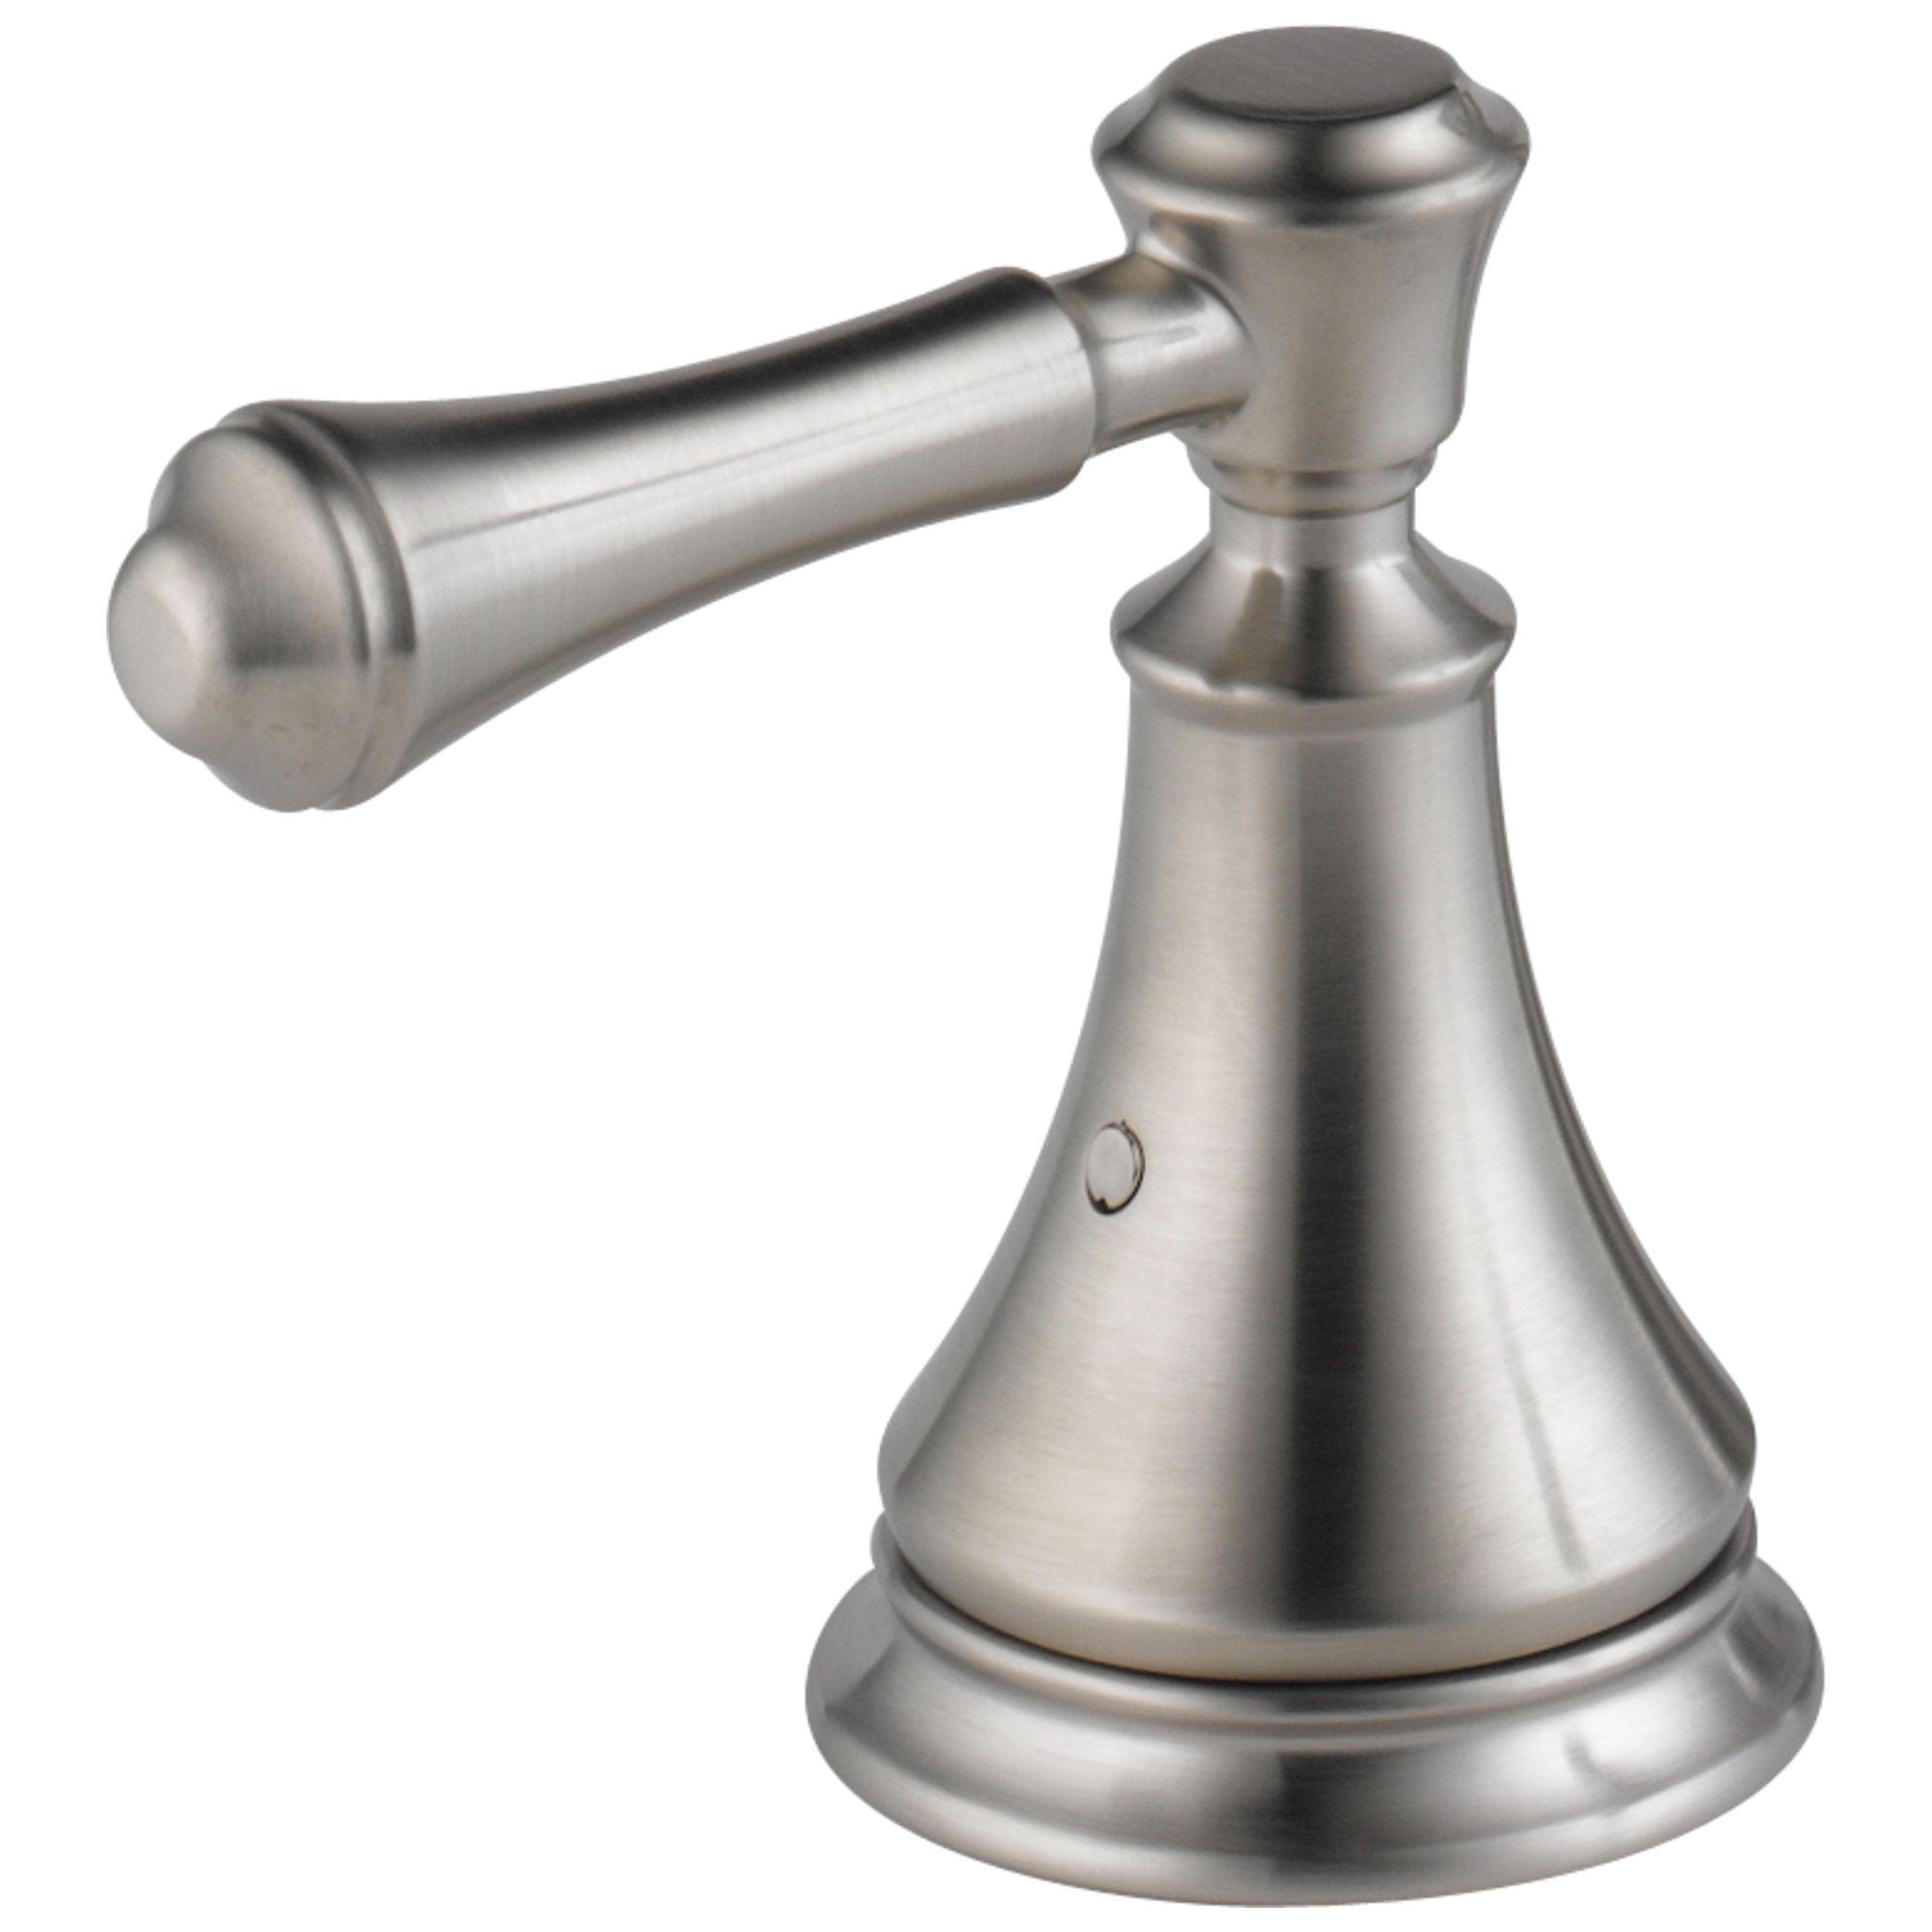 Delta Cassidy Collection Stainless Steel Finish Roman Tub Lever Handles - Quantity 2 Included 579654